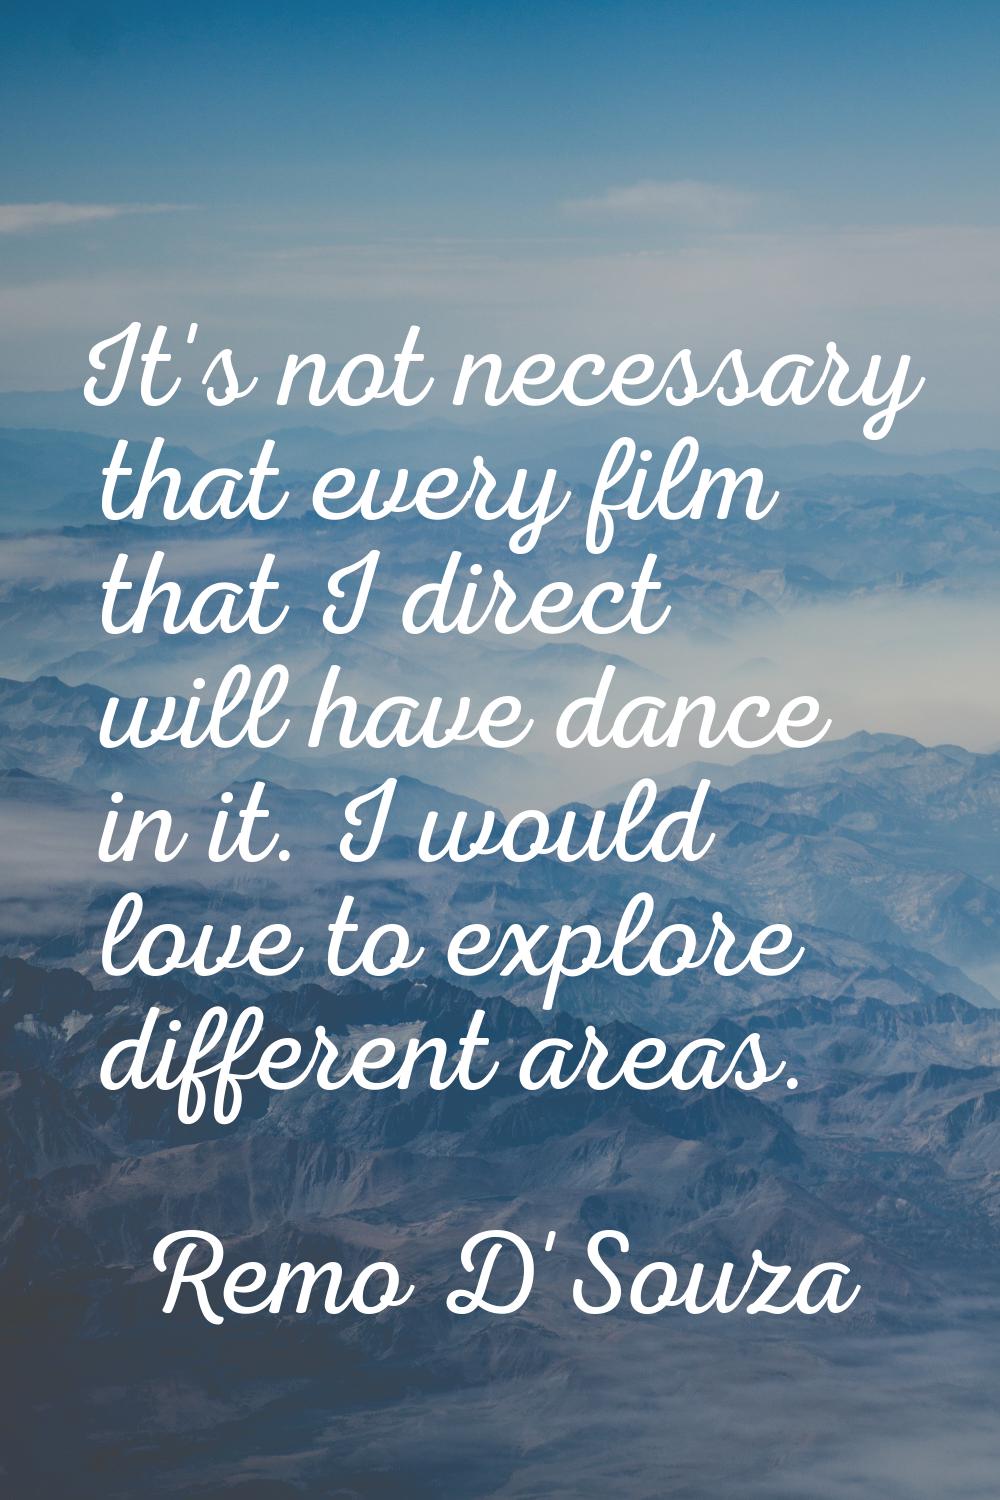 It's not necessary that every film that I direct will have dance in it. I would love to explore dif